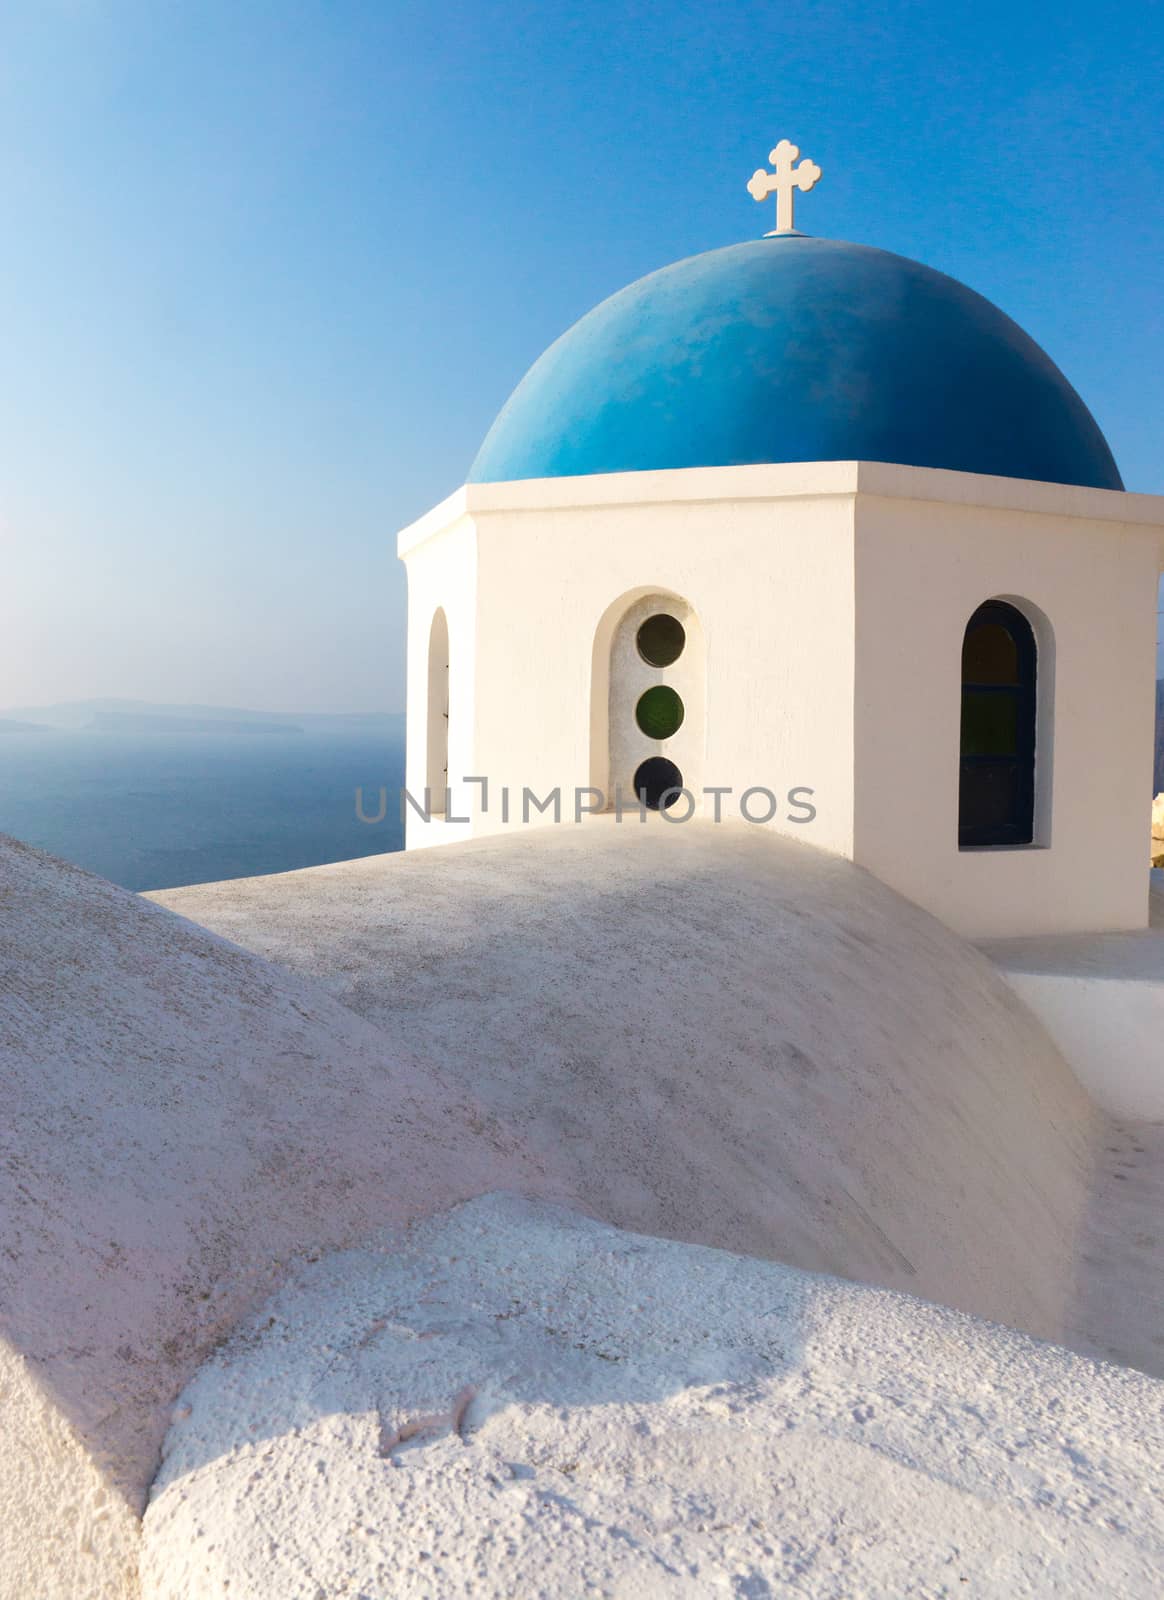 The roof and the blue cupola of a church in Oia, santorini